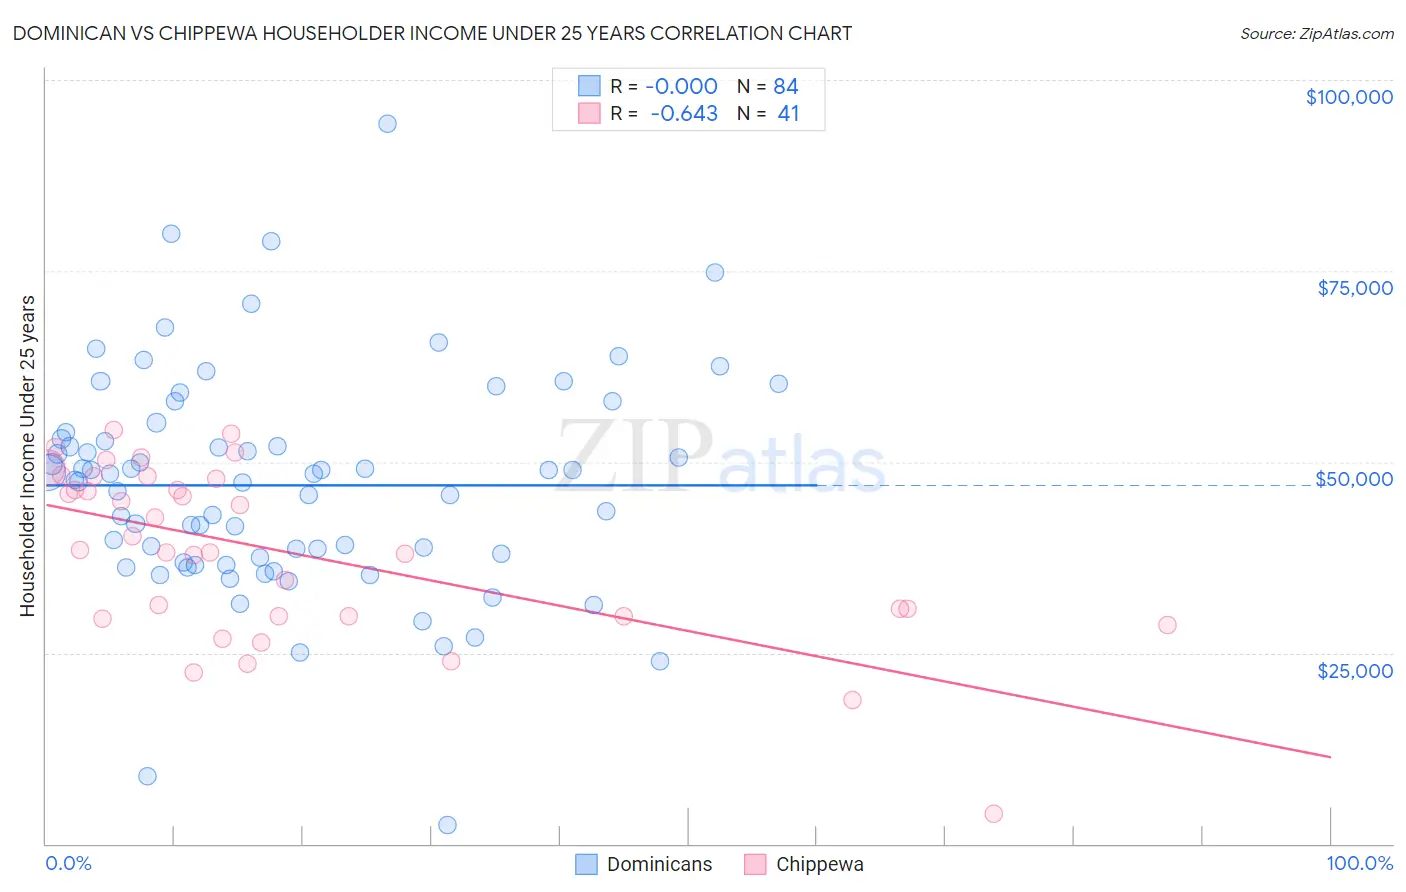 Dominican vs Chippewa Householder Income Under 25 years